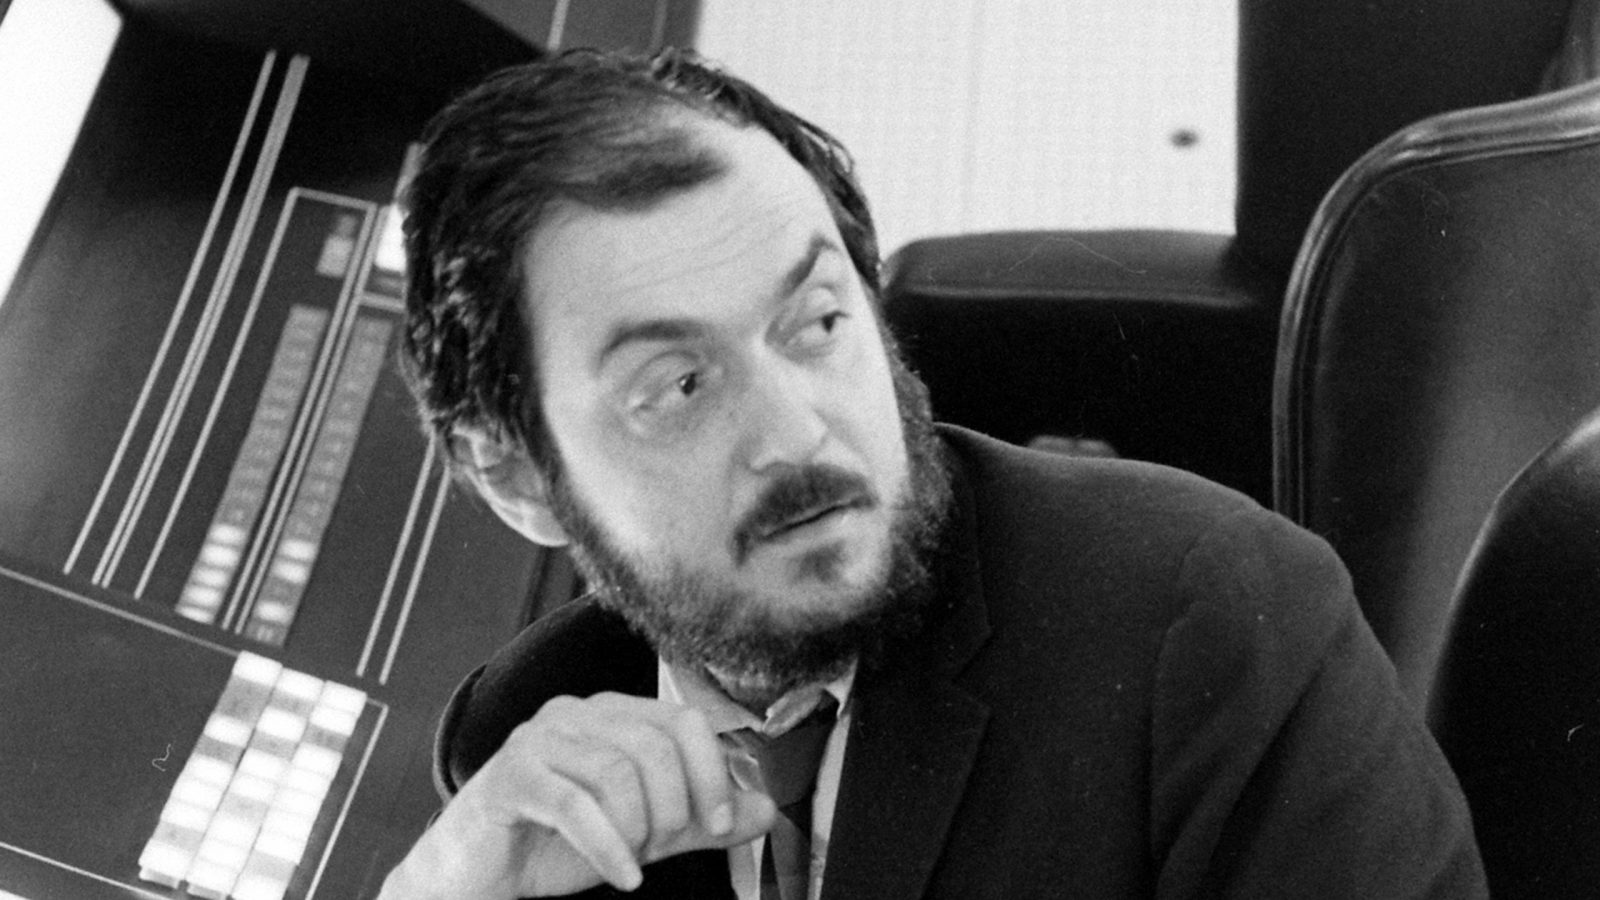 Can You Go 15/15 on This Incredibly Easy Movie Quiz? Stanley Kubrick